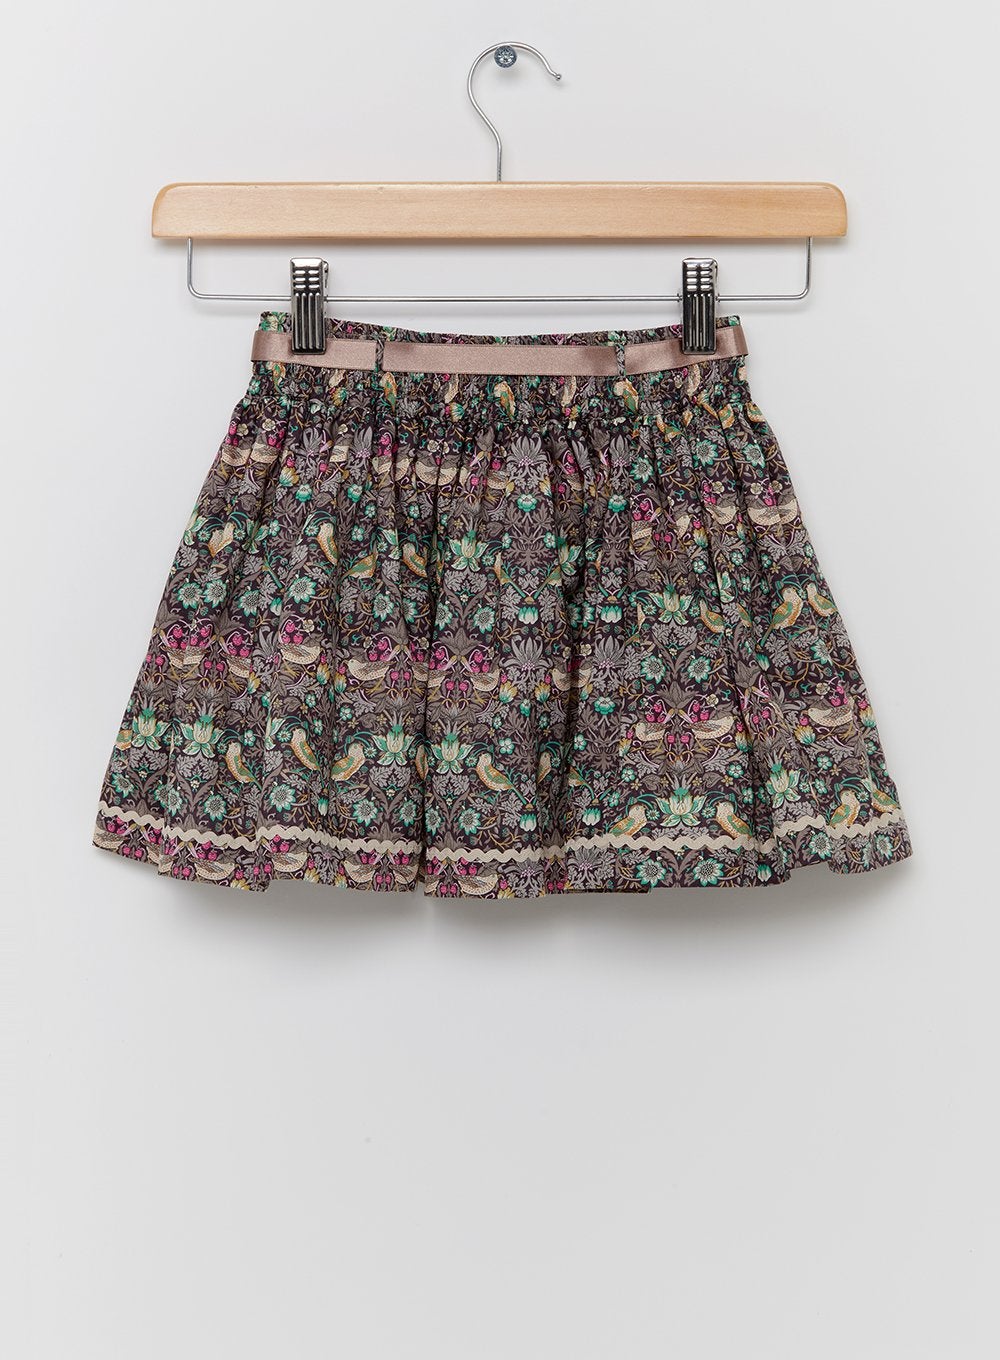 Lily Rose Skirt Strawberry Thief Ric Rac Skirt - Trotters Childrenswear